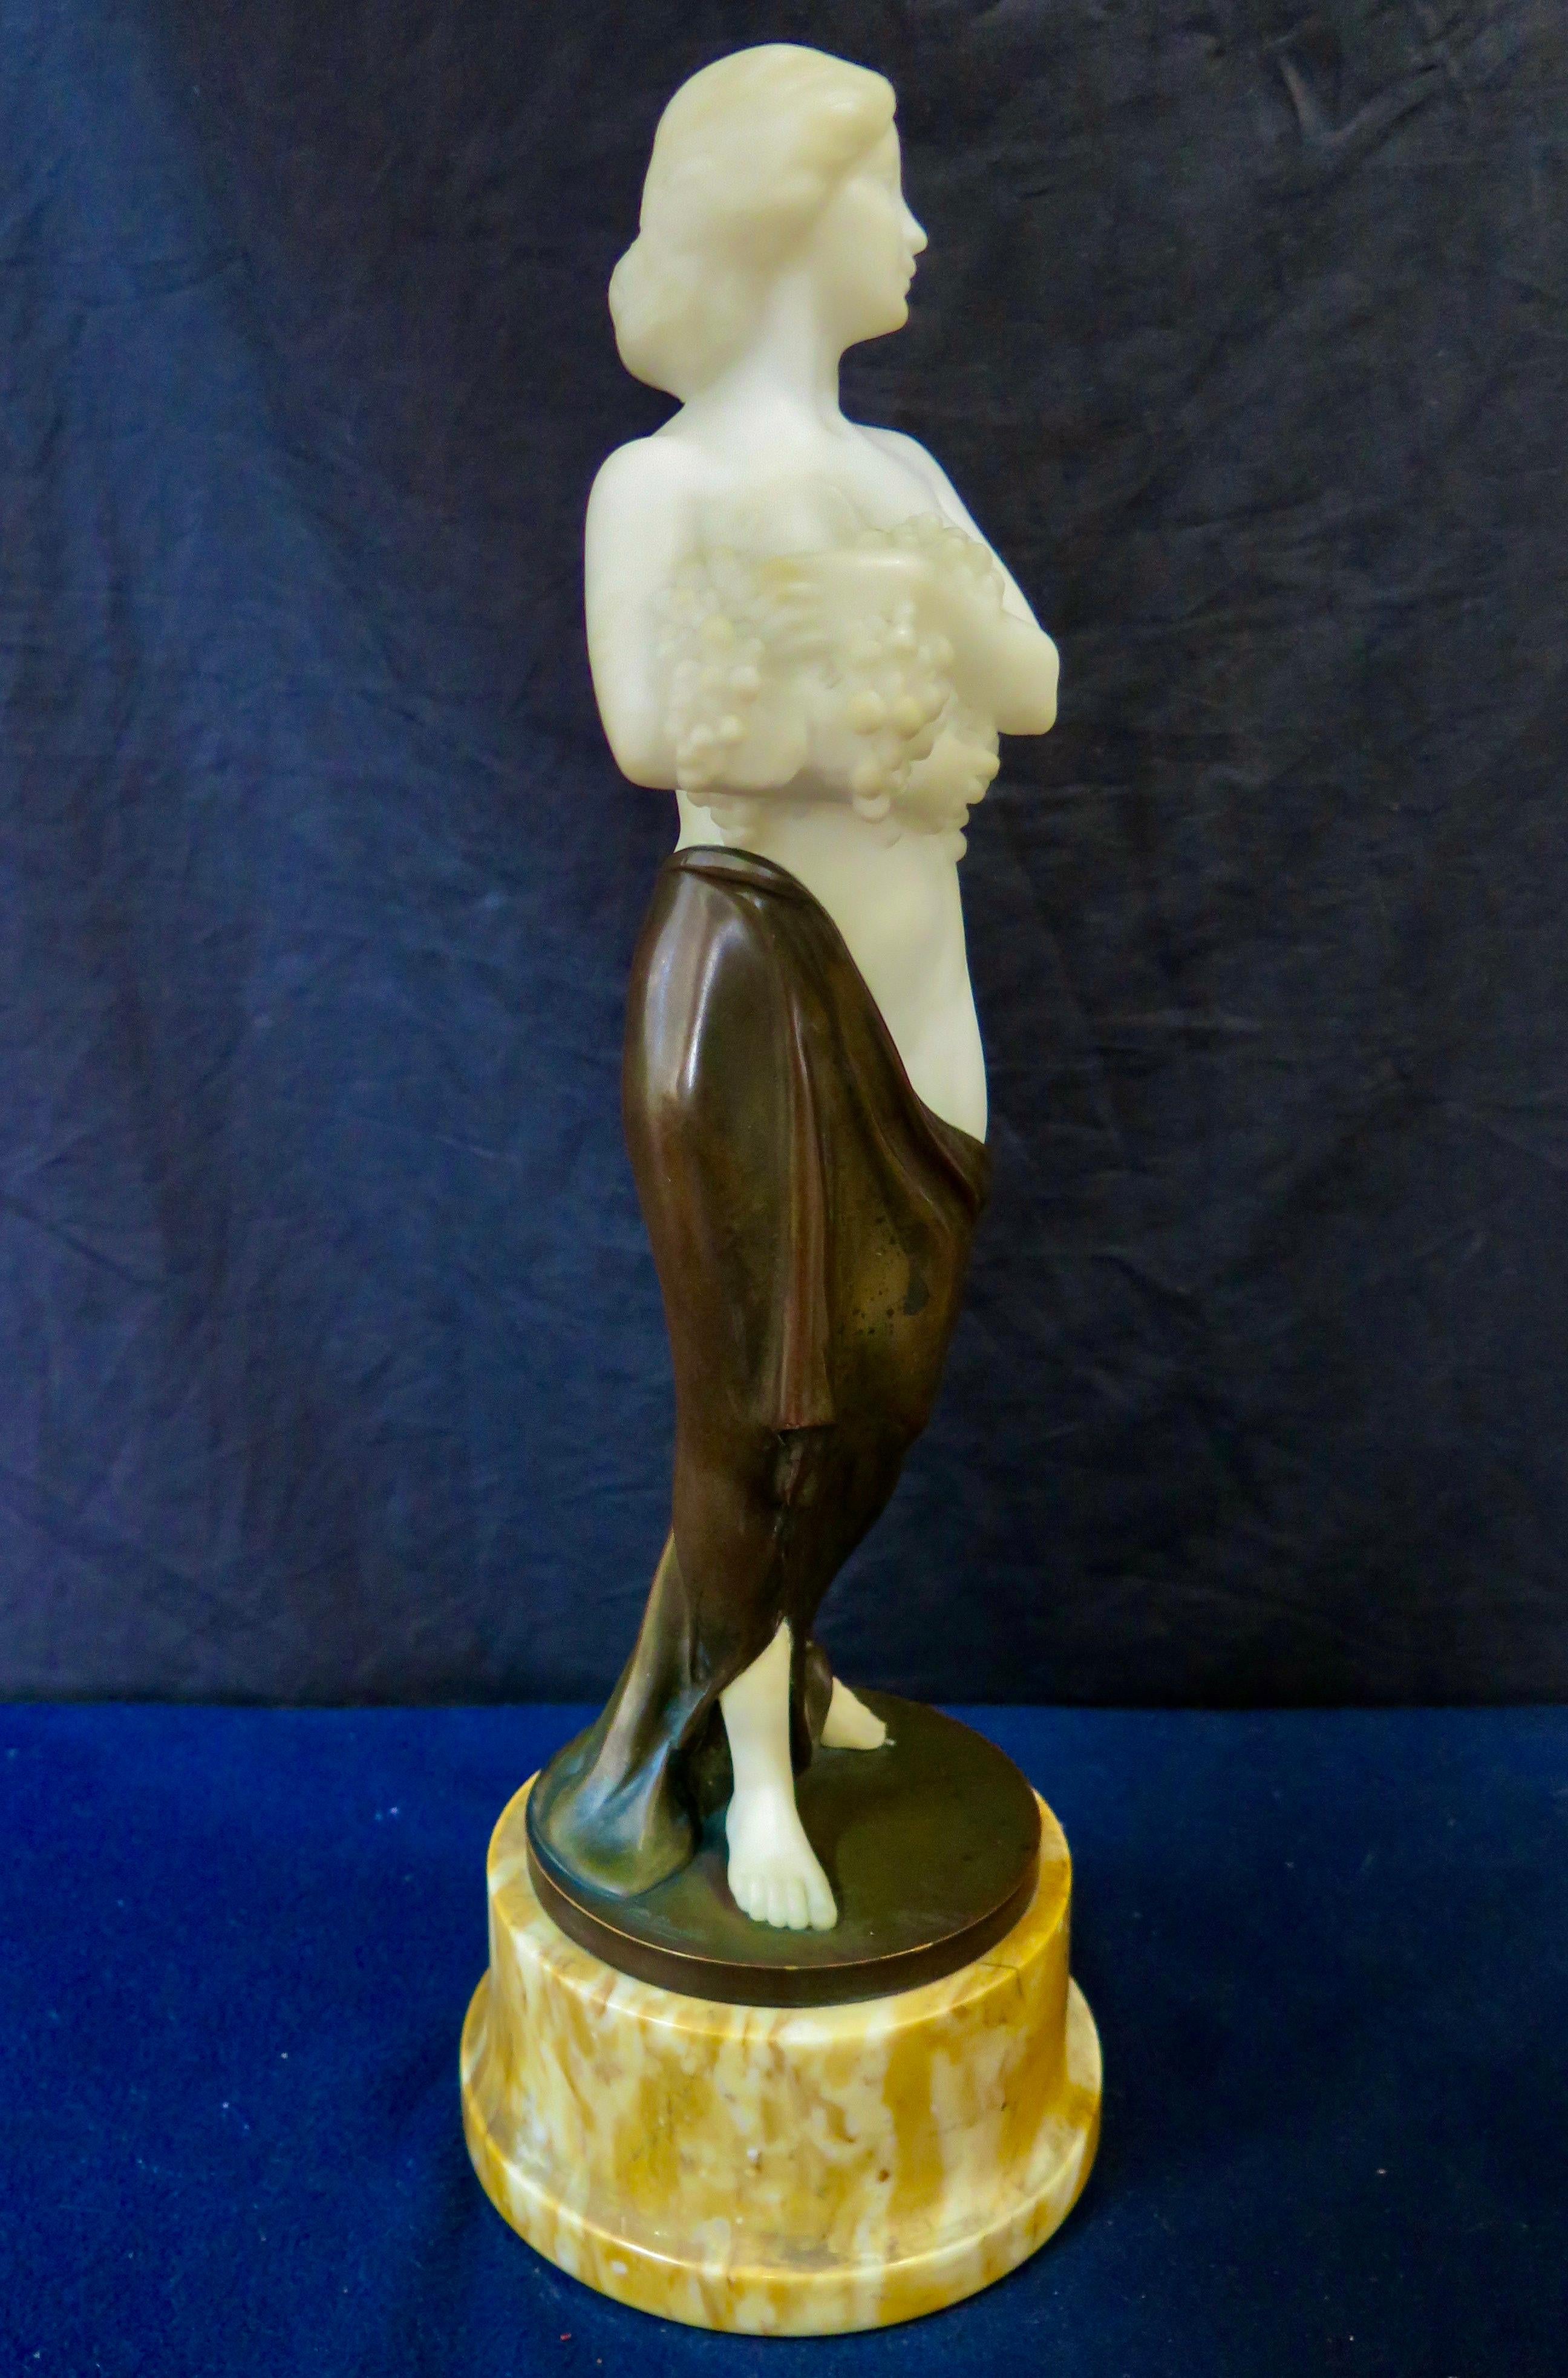 This vintage patinated bronze & hand carved alabaster figural sculpture dates from the early 20th century. The sculpture depicts a shapely semi nude young woman in a draped skirt descending from her hip. She modestly conceals her breasts by holding